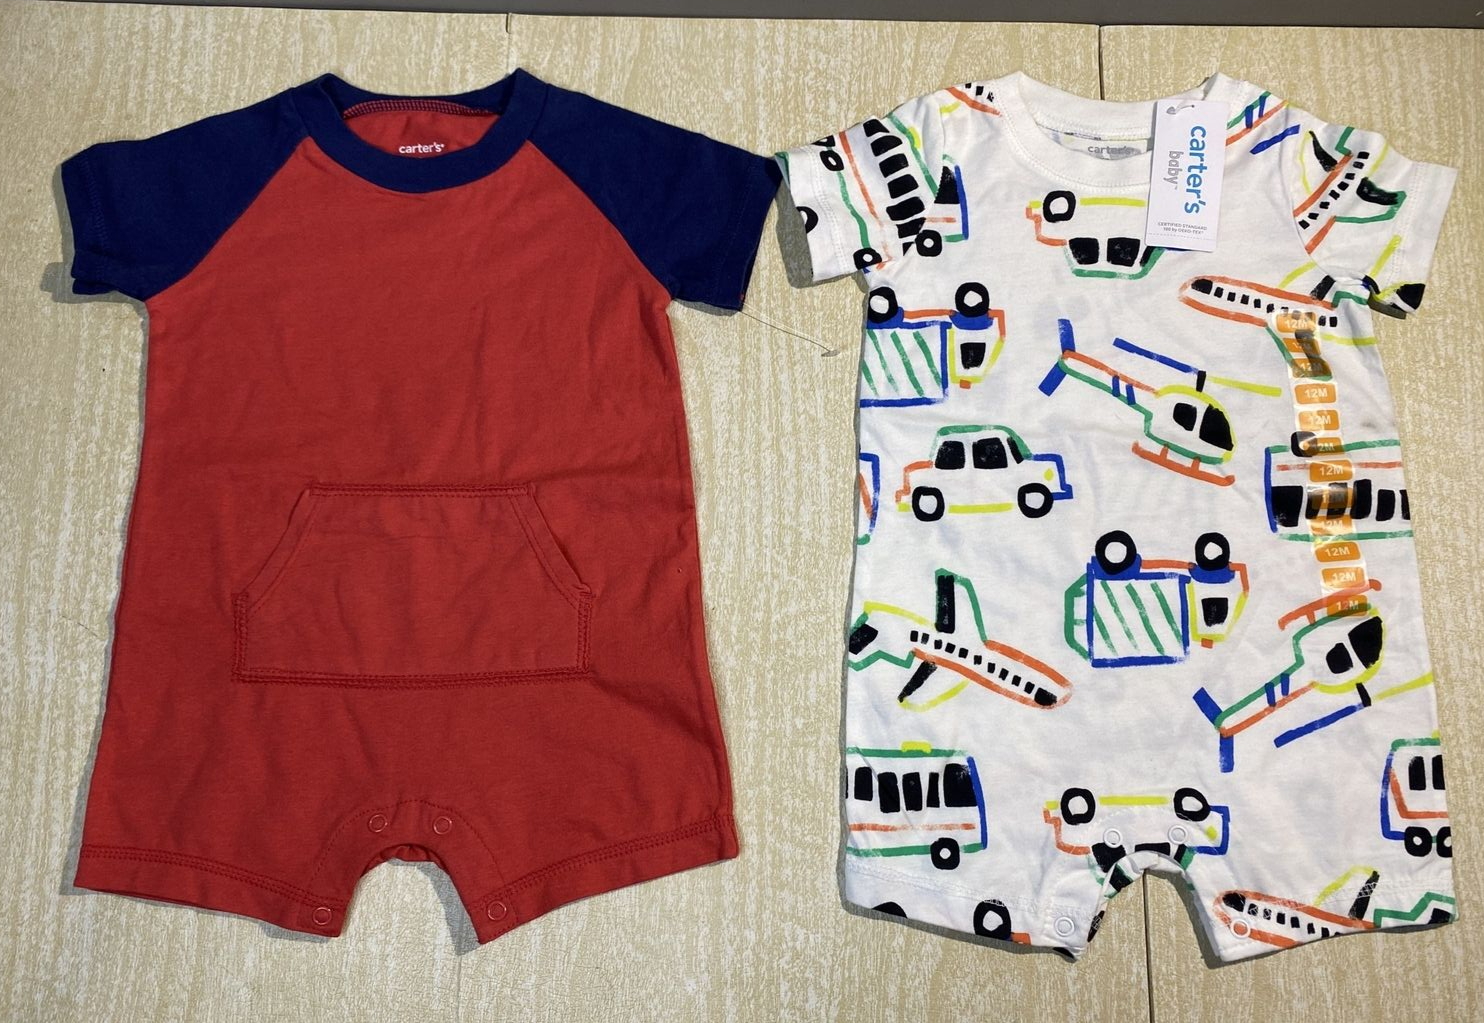 Carters Baby Rompers Infant 12 months Airplanes Cars Trucks Bus Copters Lot of 2 - $7.70